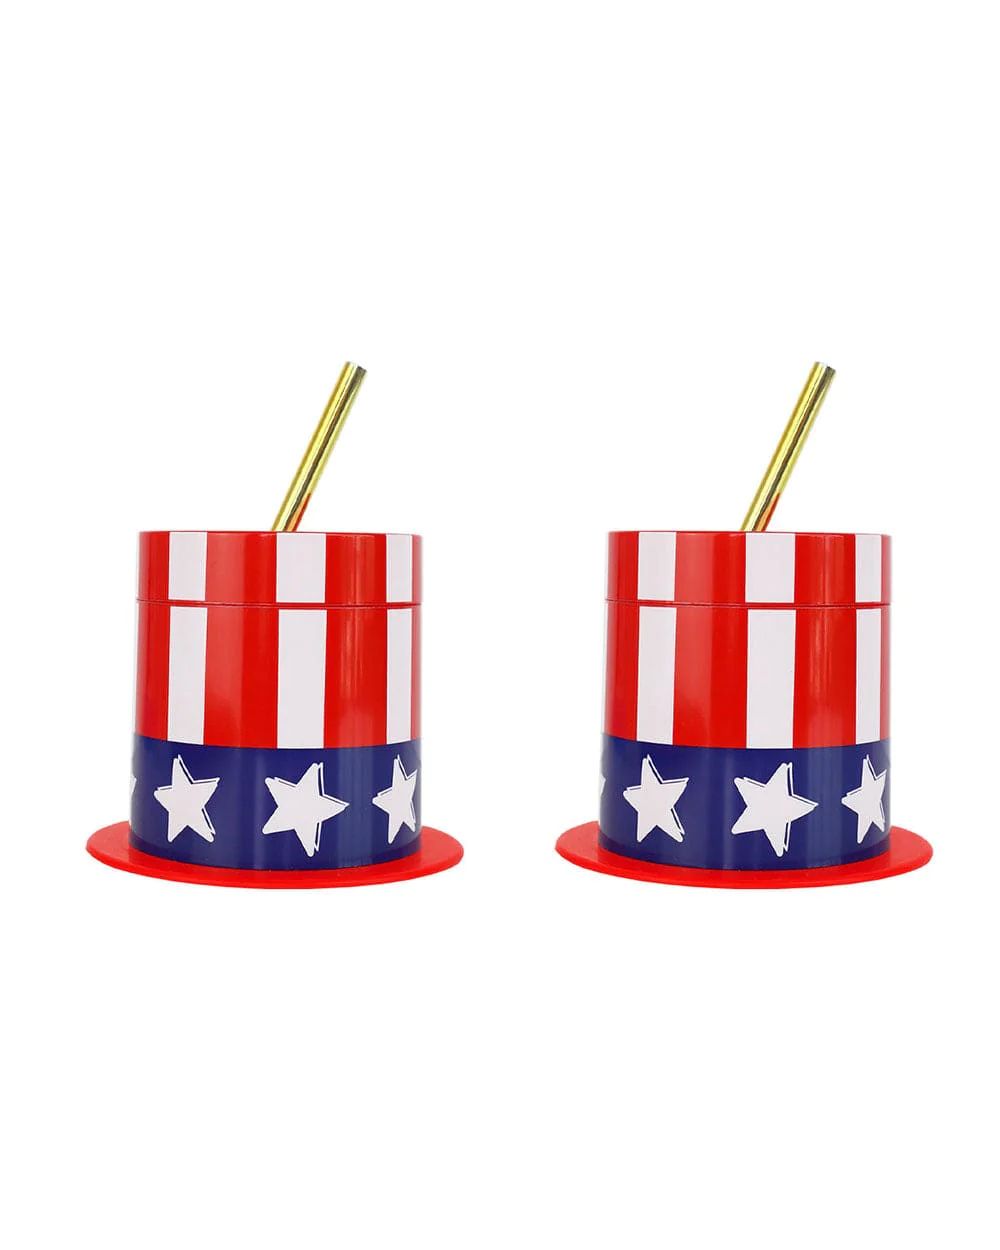 Hats Off To The USA Sipper Set with Straws (Set of 2) | Packed Party